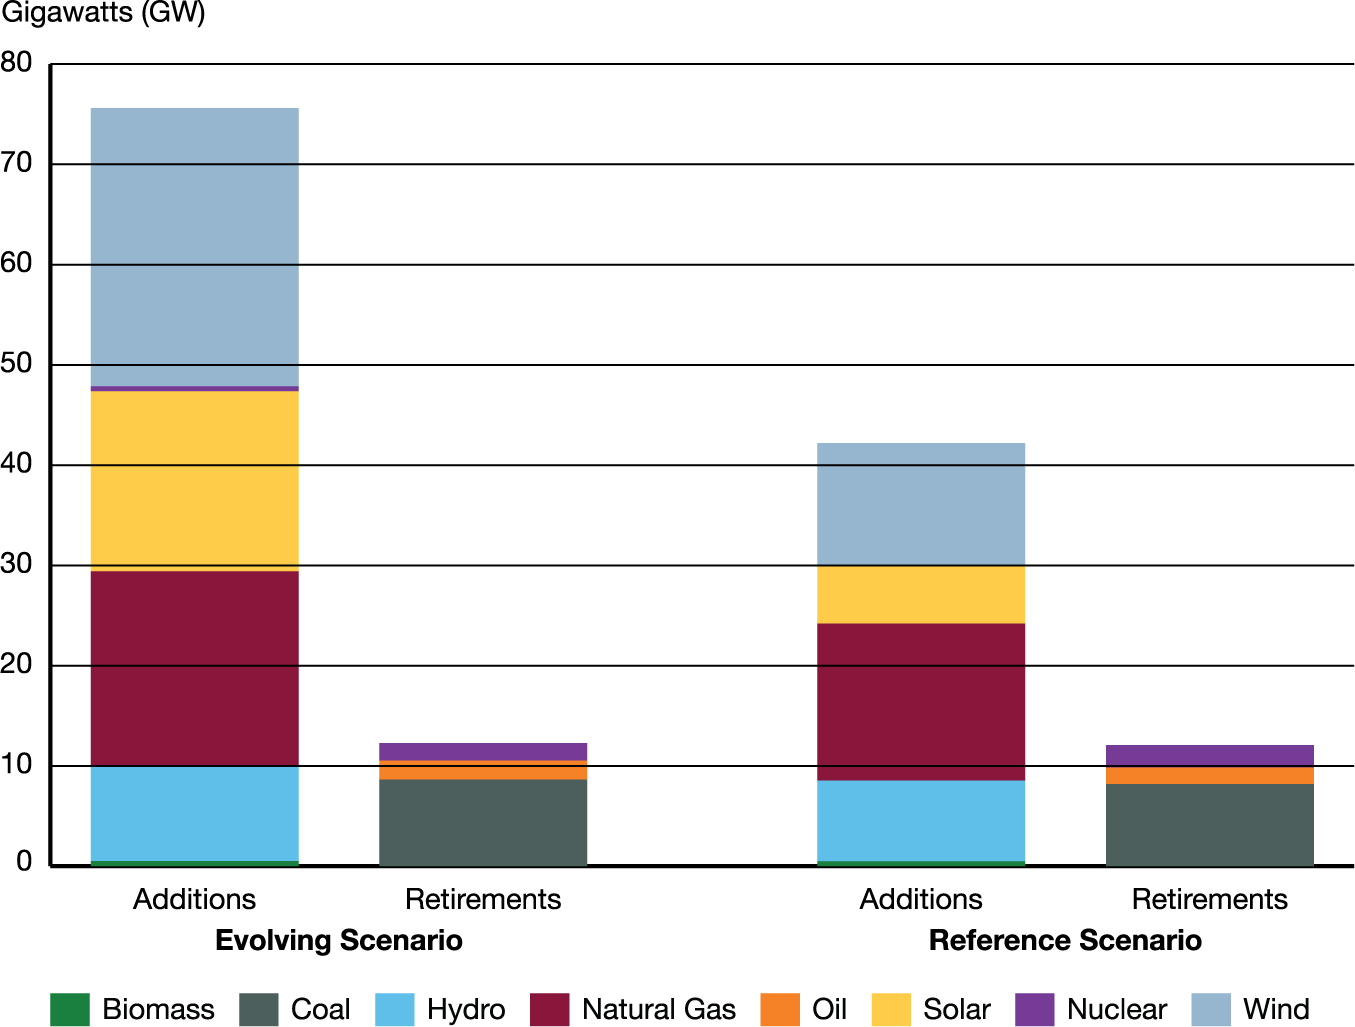 Electricity Capacity Additions and Retirements